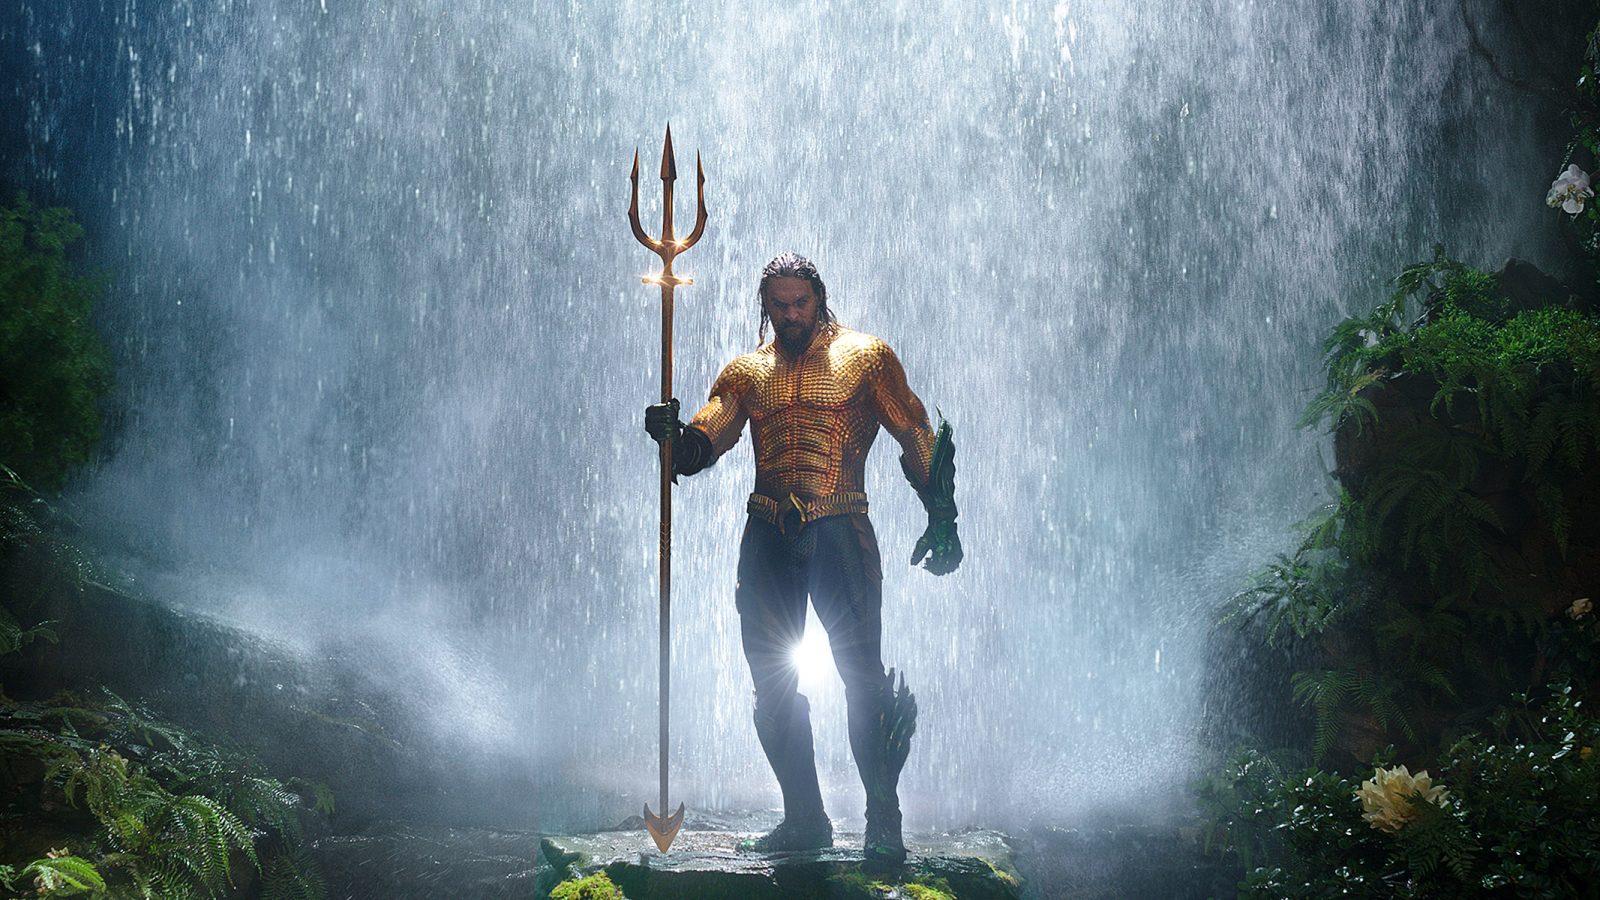 Jason Momoa as Aquaman holding a trident under a waterfall in DC's Aquaman.